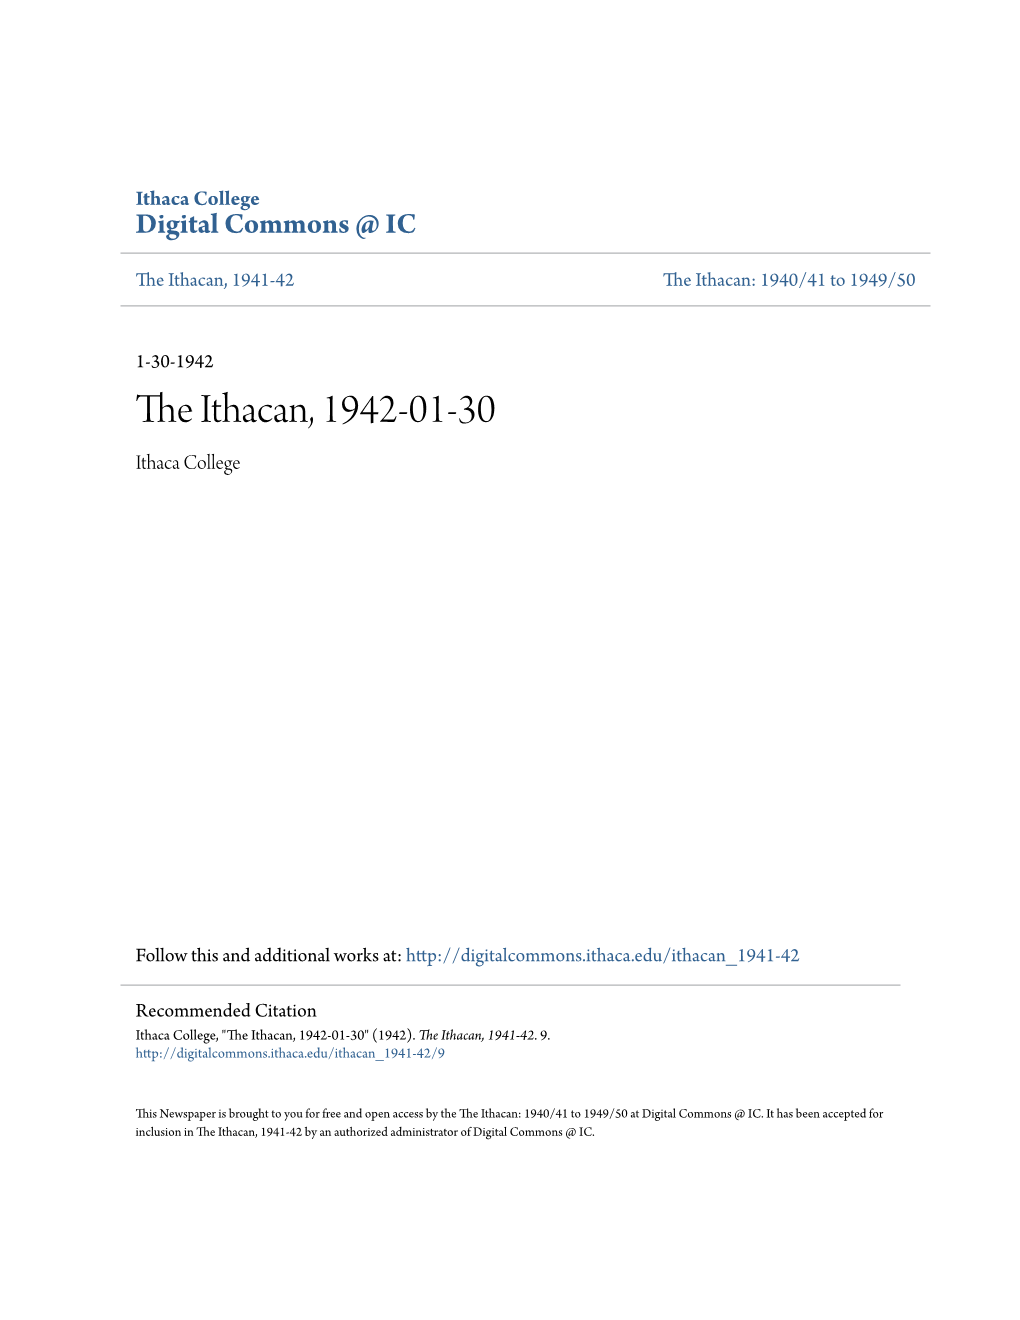 The Ithacan, 1942-01-30